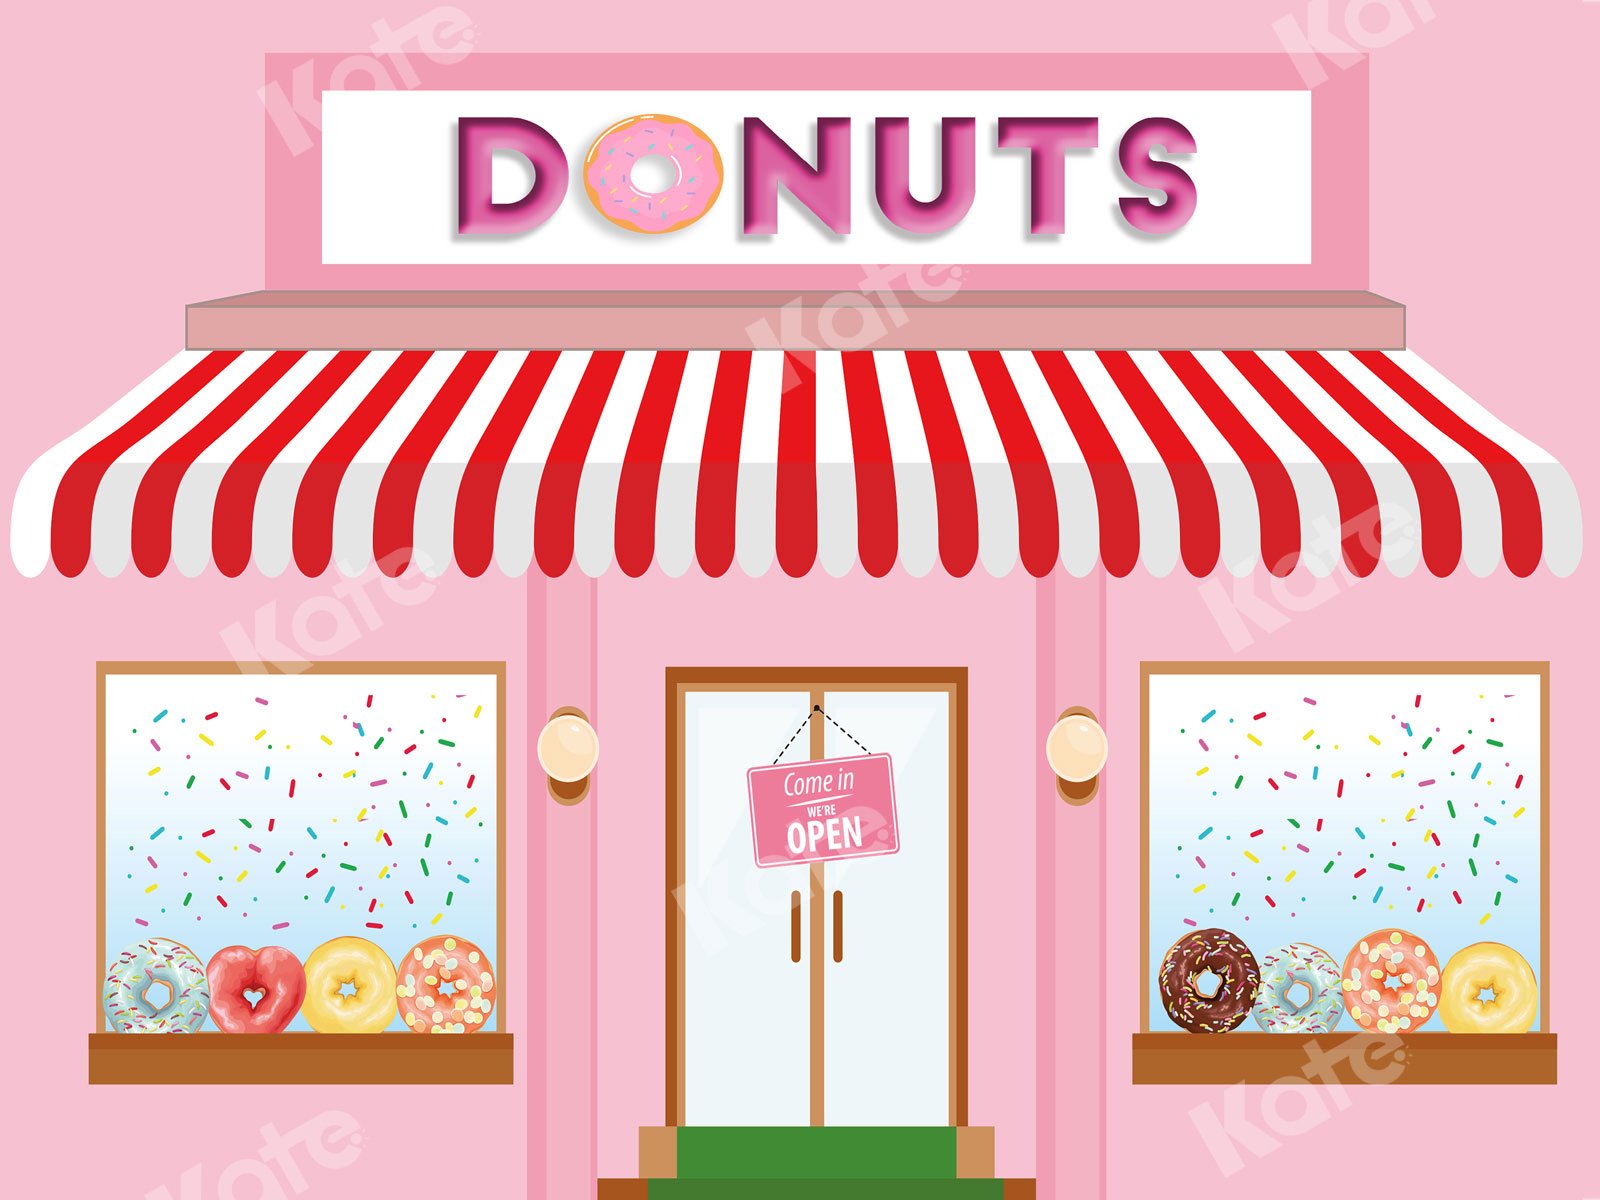 Kate Pink Donuts Shop Backdrop for Photography